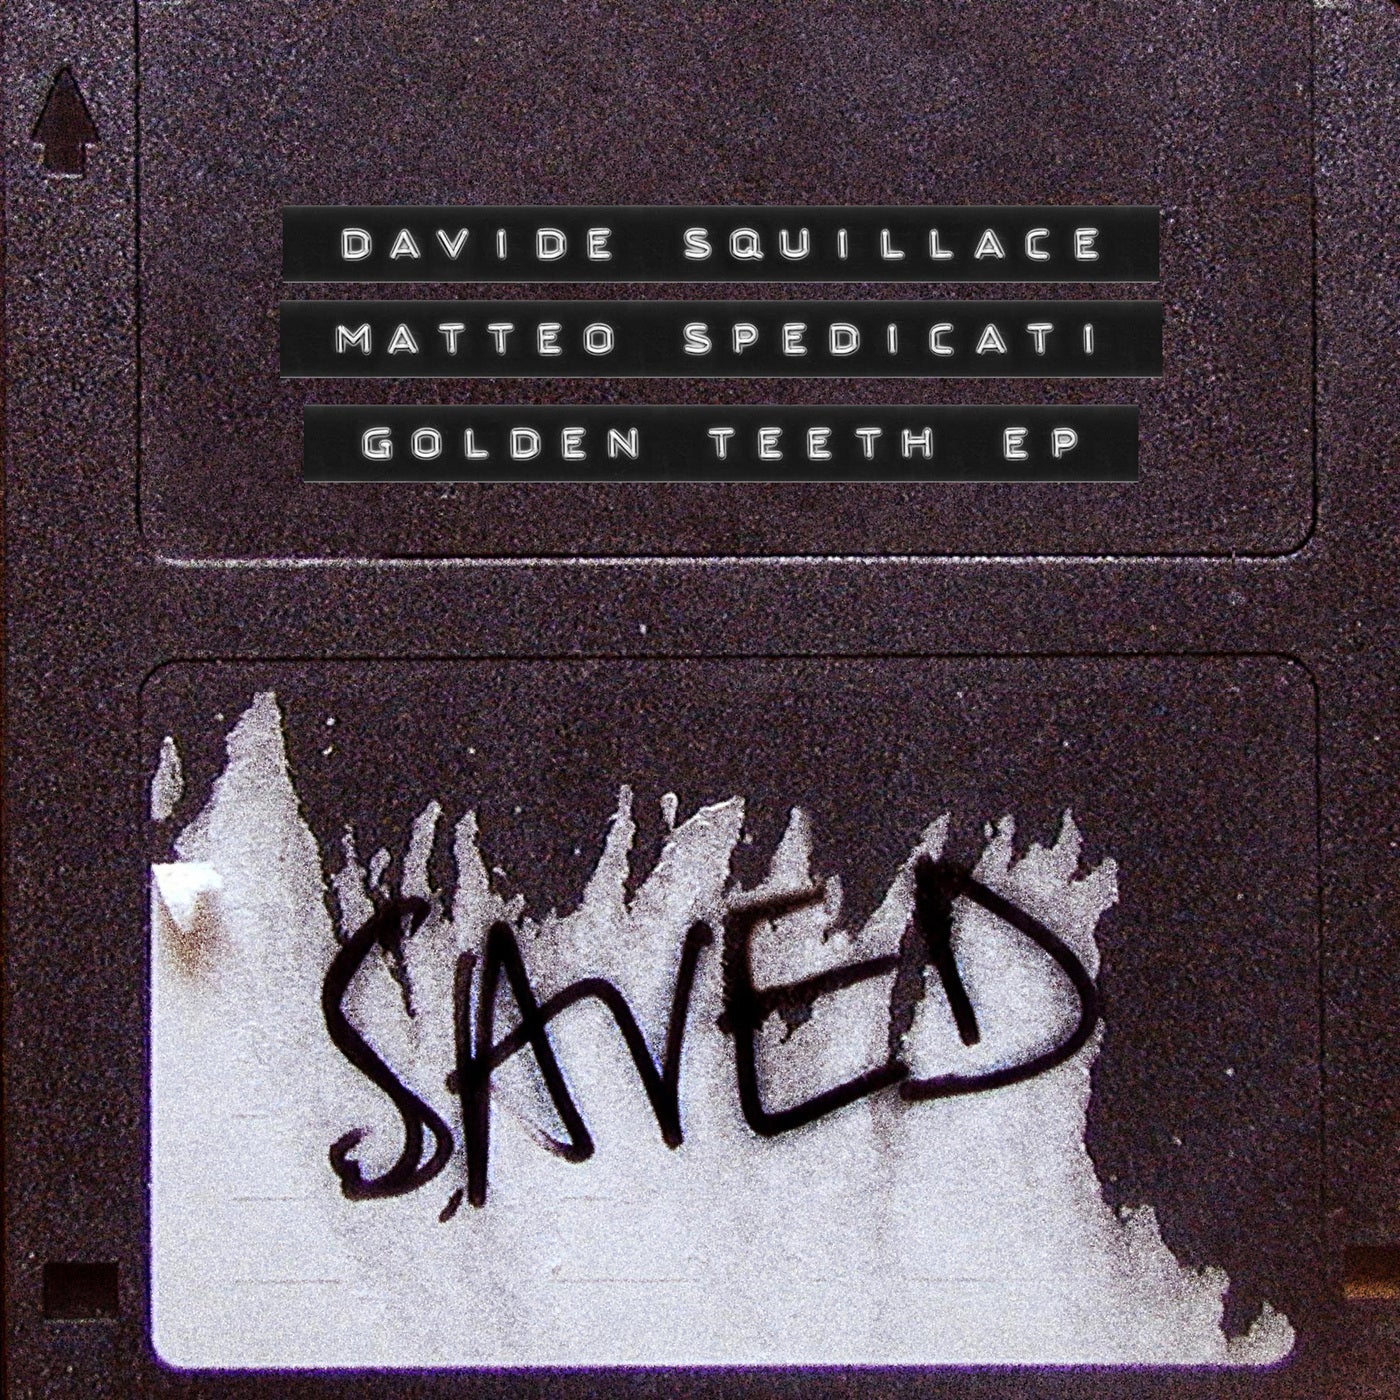 Download Davide Squillace, Matteo Spedicati - Golden Teeth EP on Electrobuzz